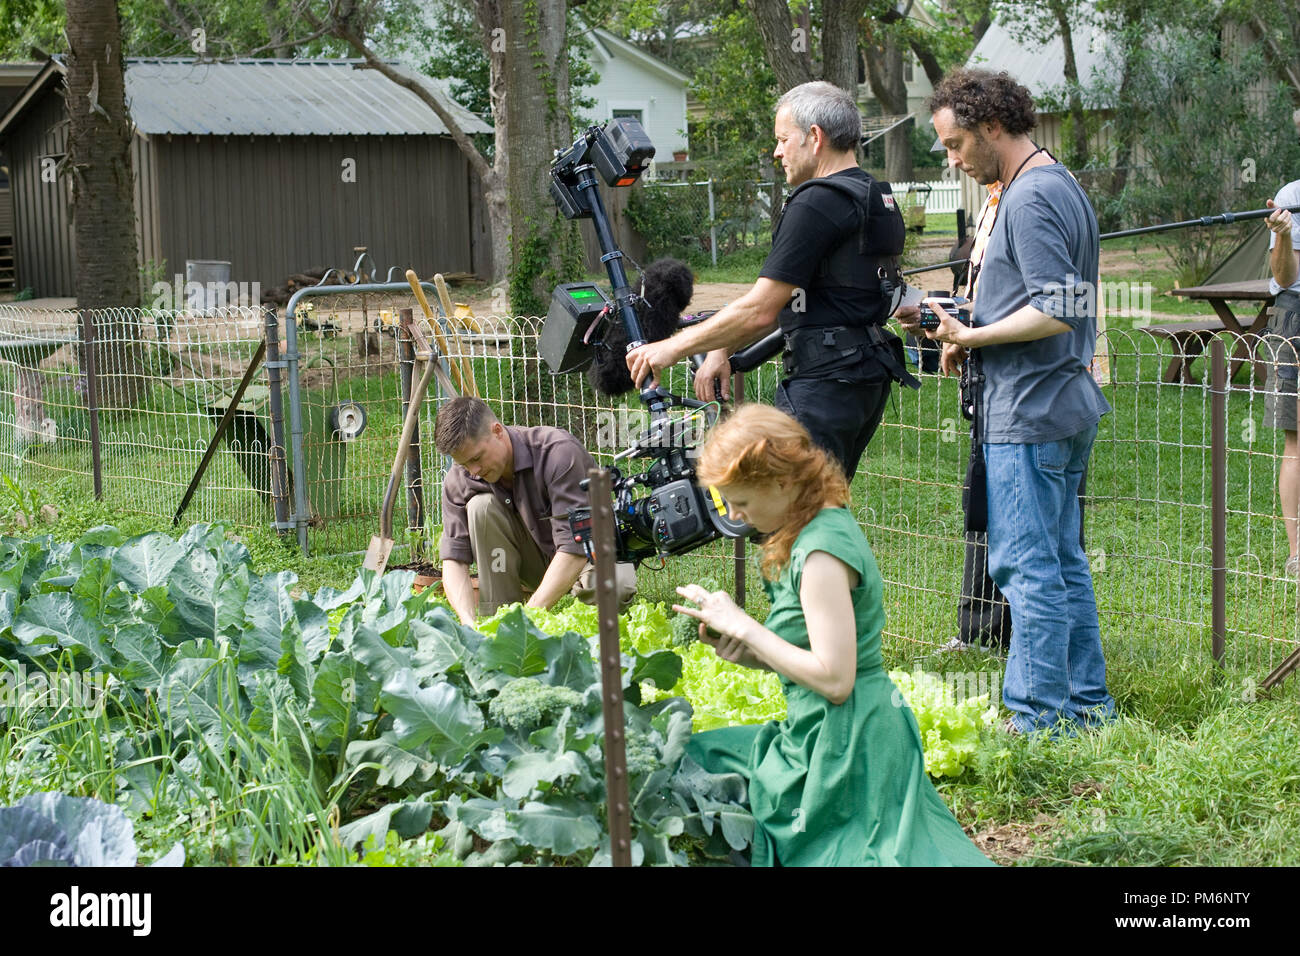 from left: Brad Pitt, Jessica Chastain, Joerg Widmer (steadicam operator) and Emmanuel Lubezki in THE TREE OF LIFE. PHOTO CREDITS: MERIE WALLACE. Stock Photo